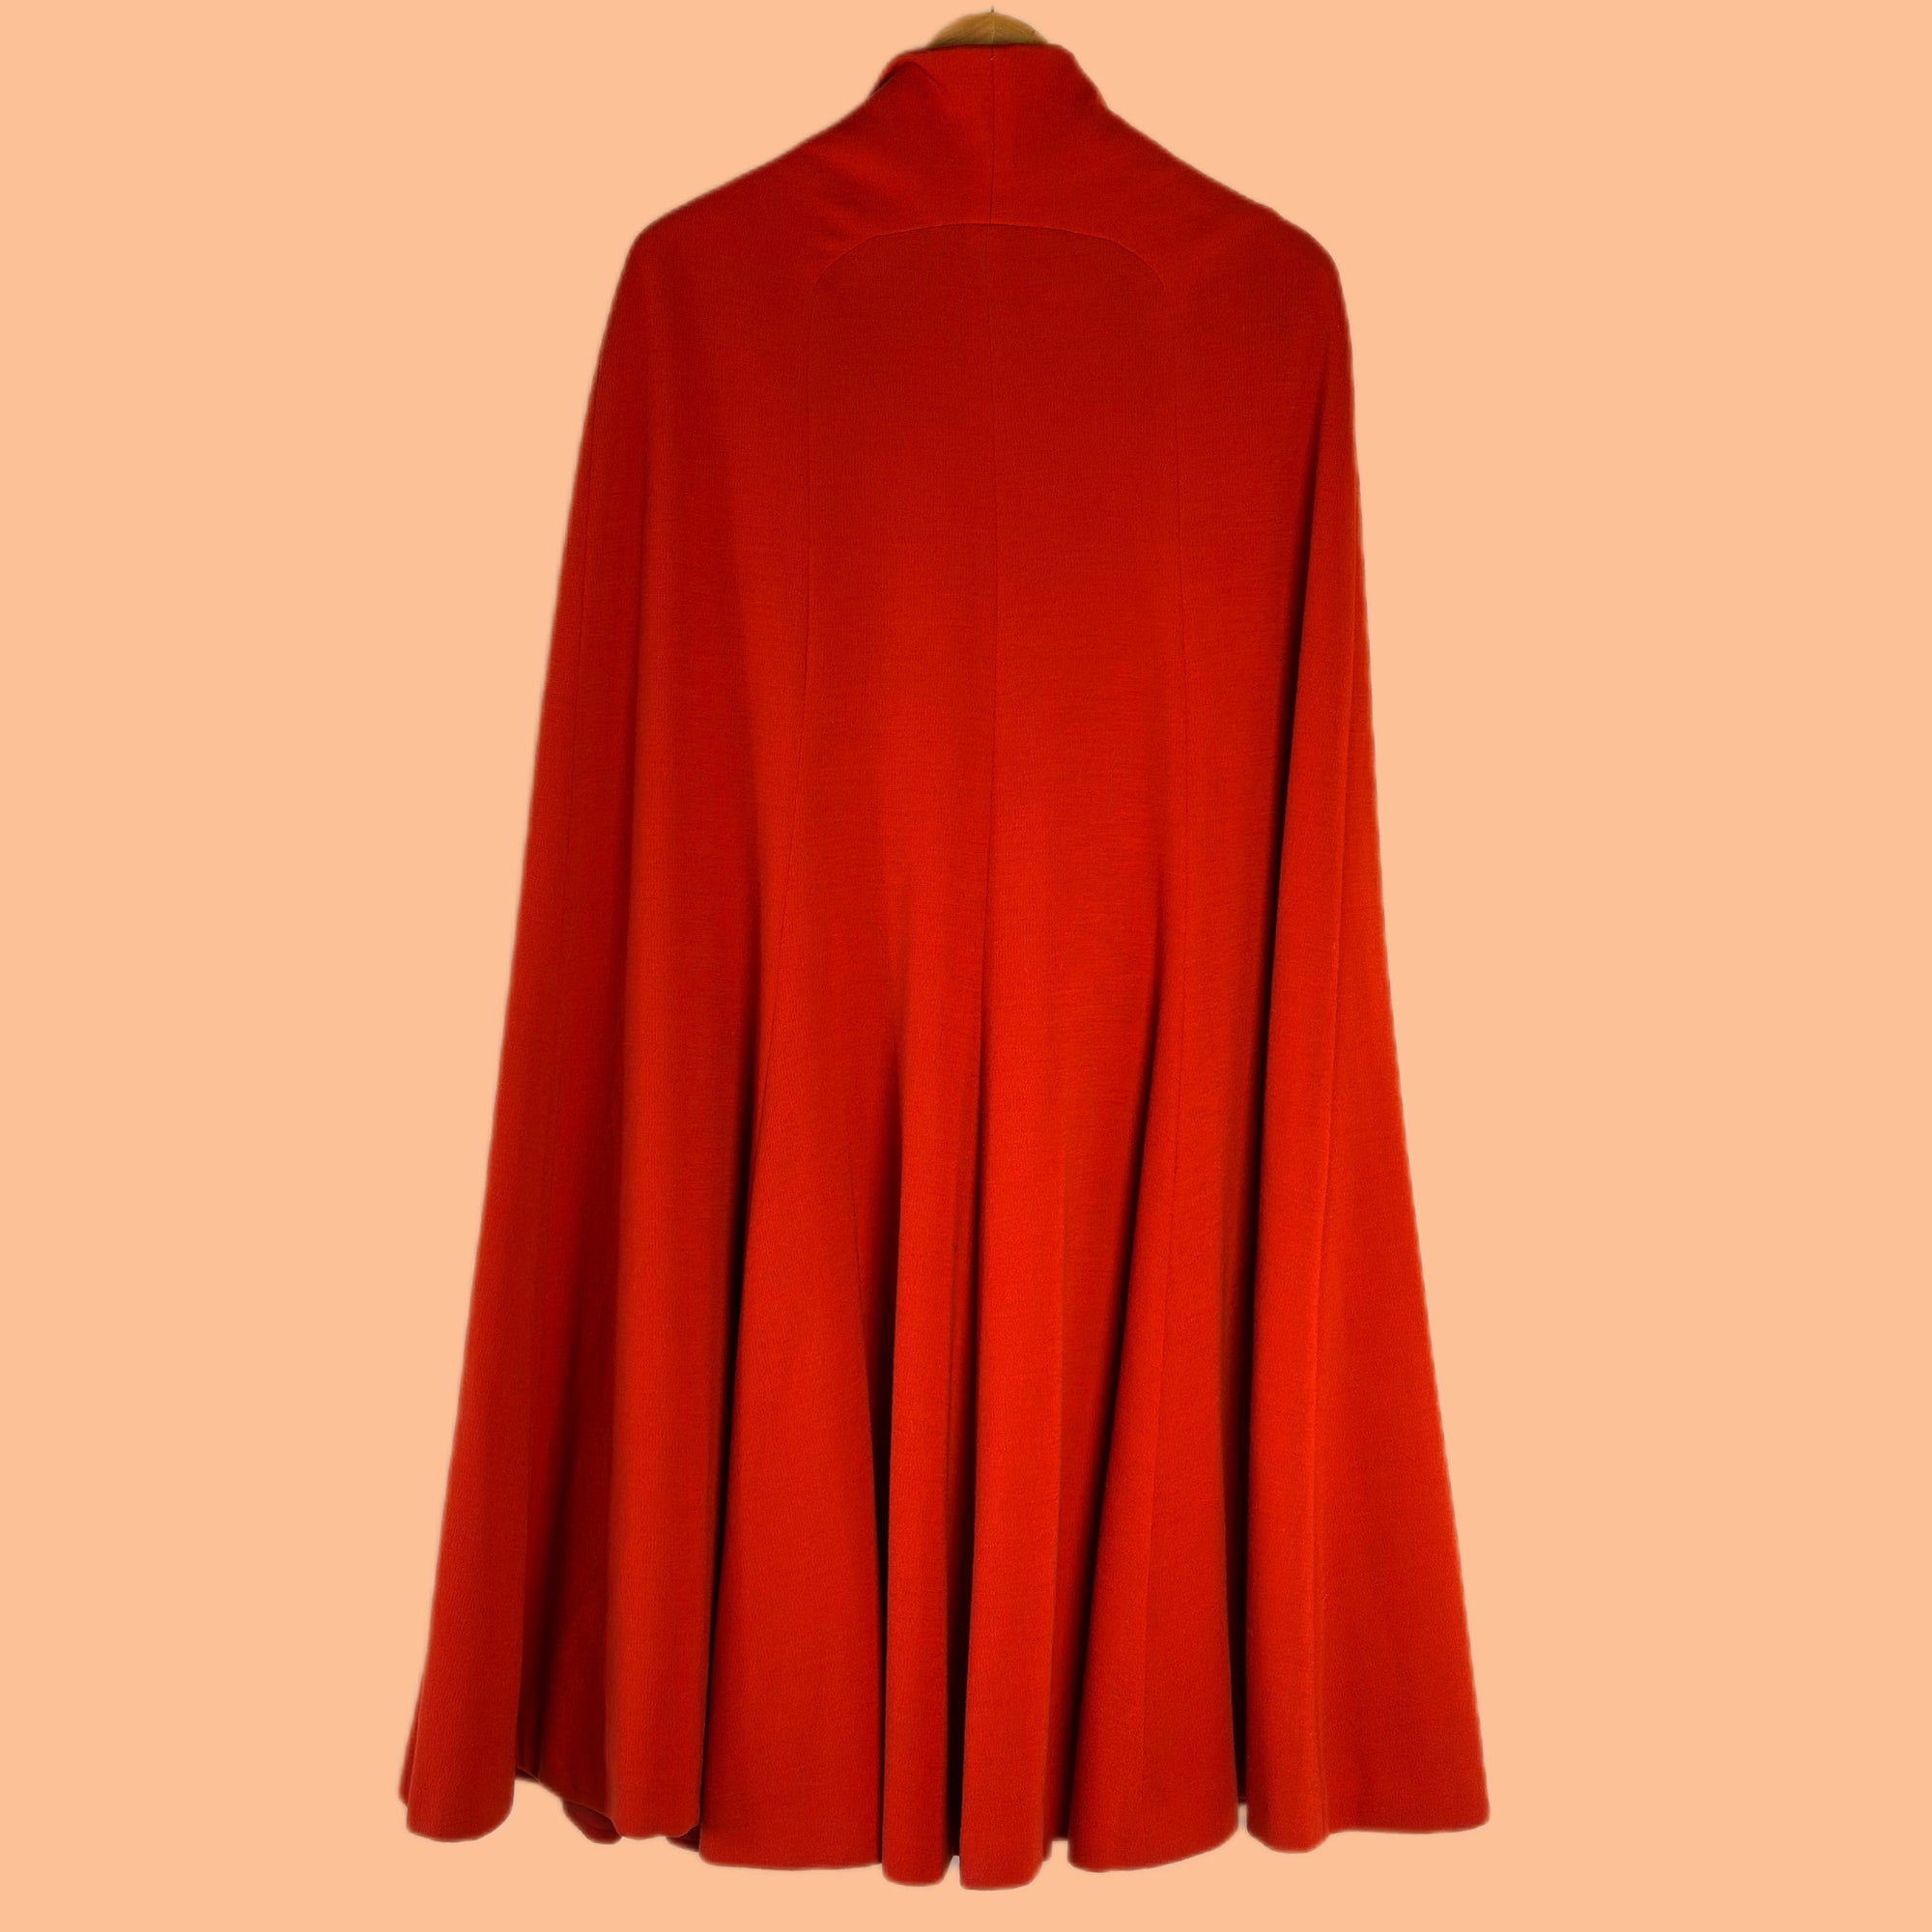 Cape in Candy Apple Red